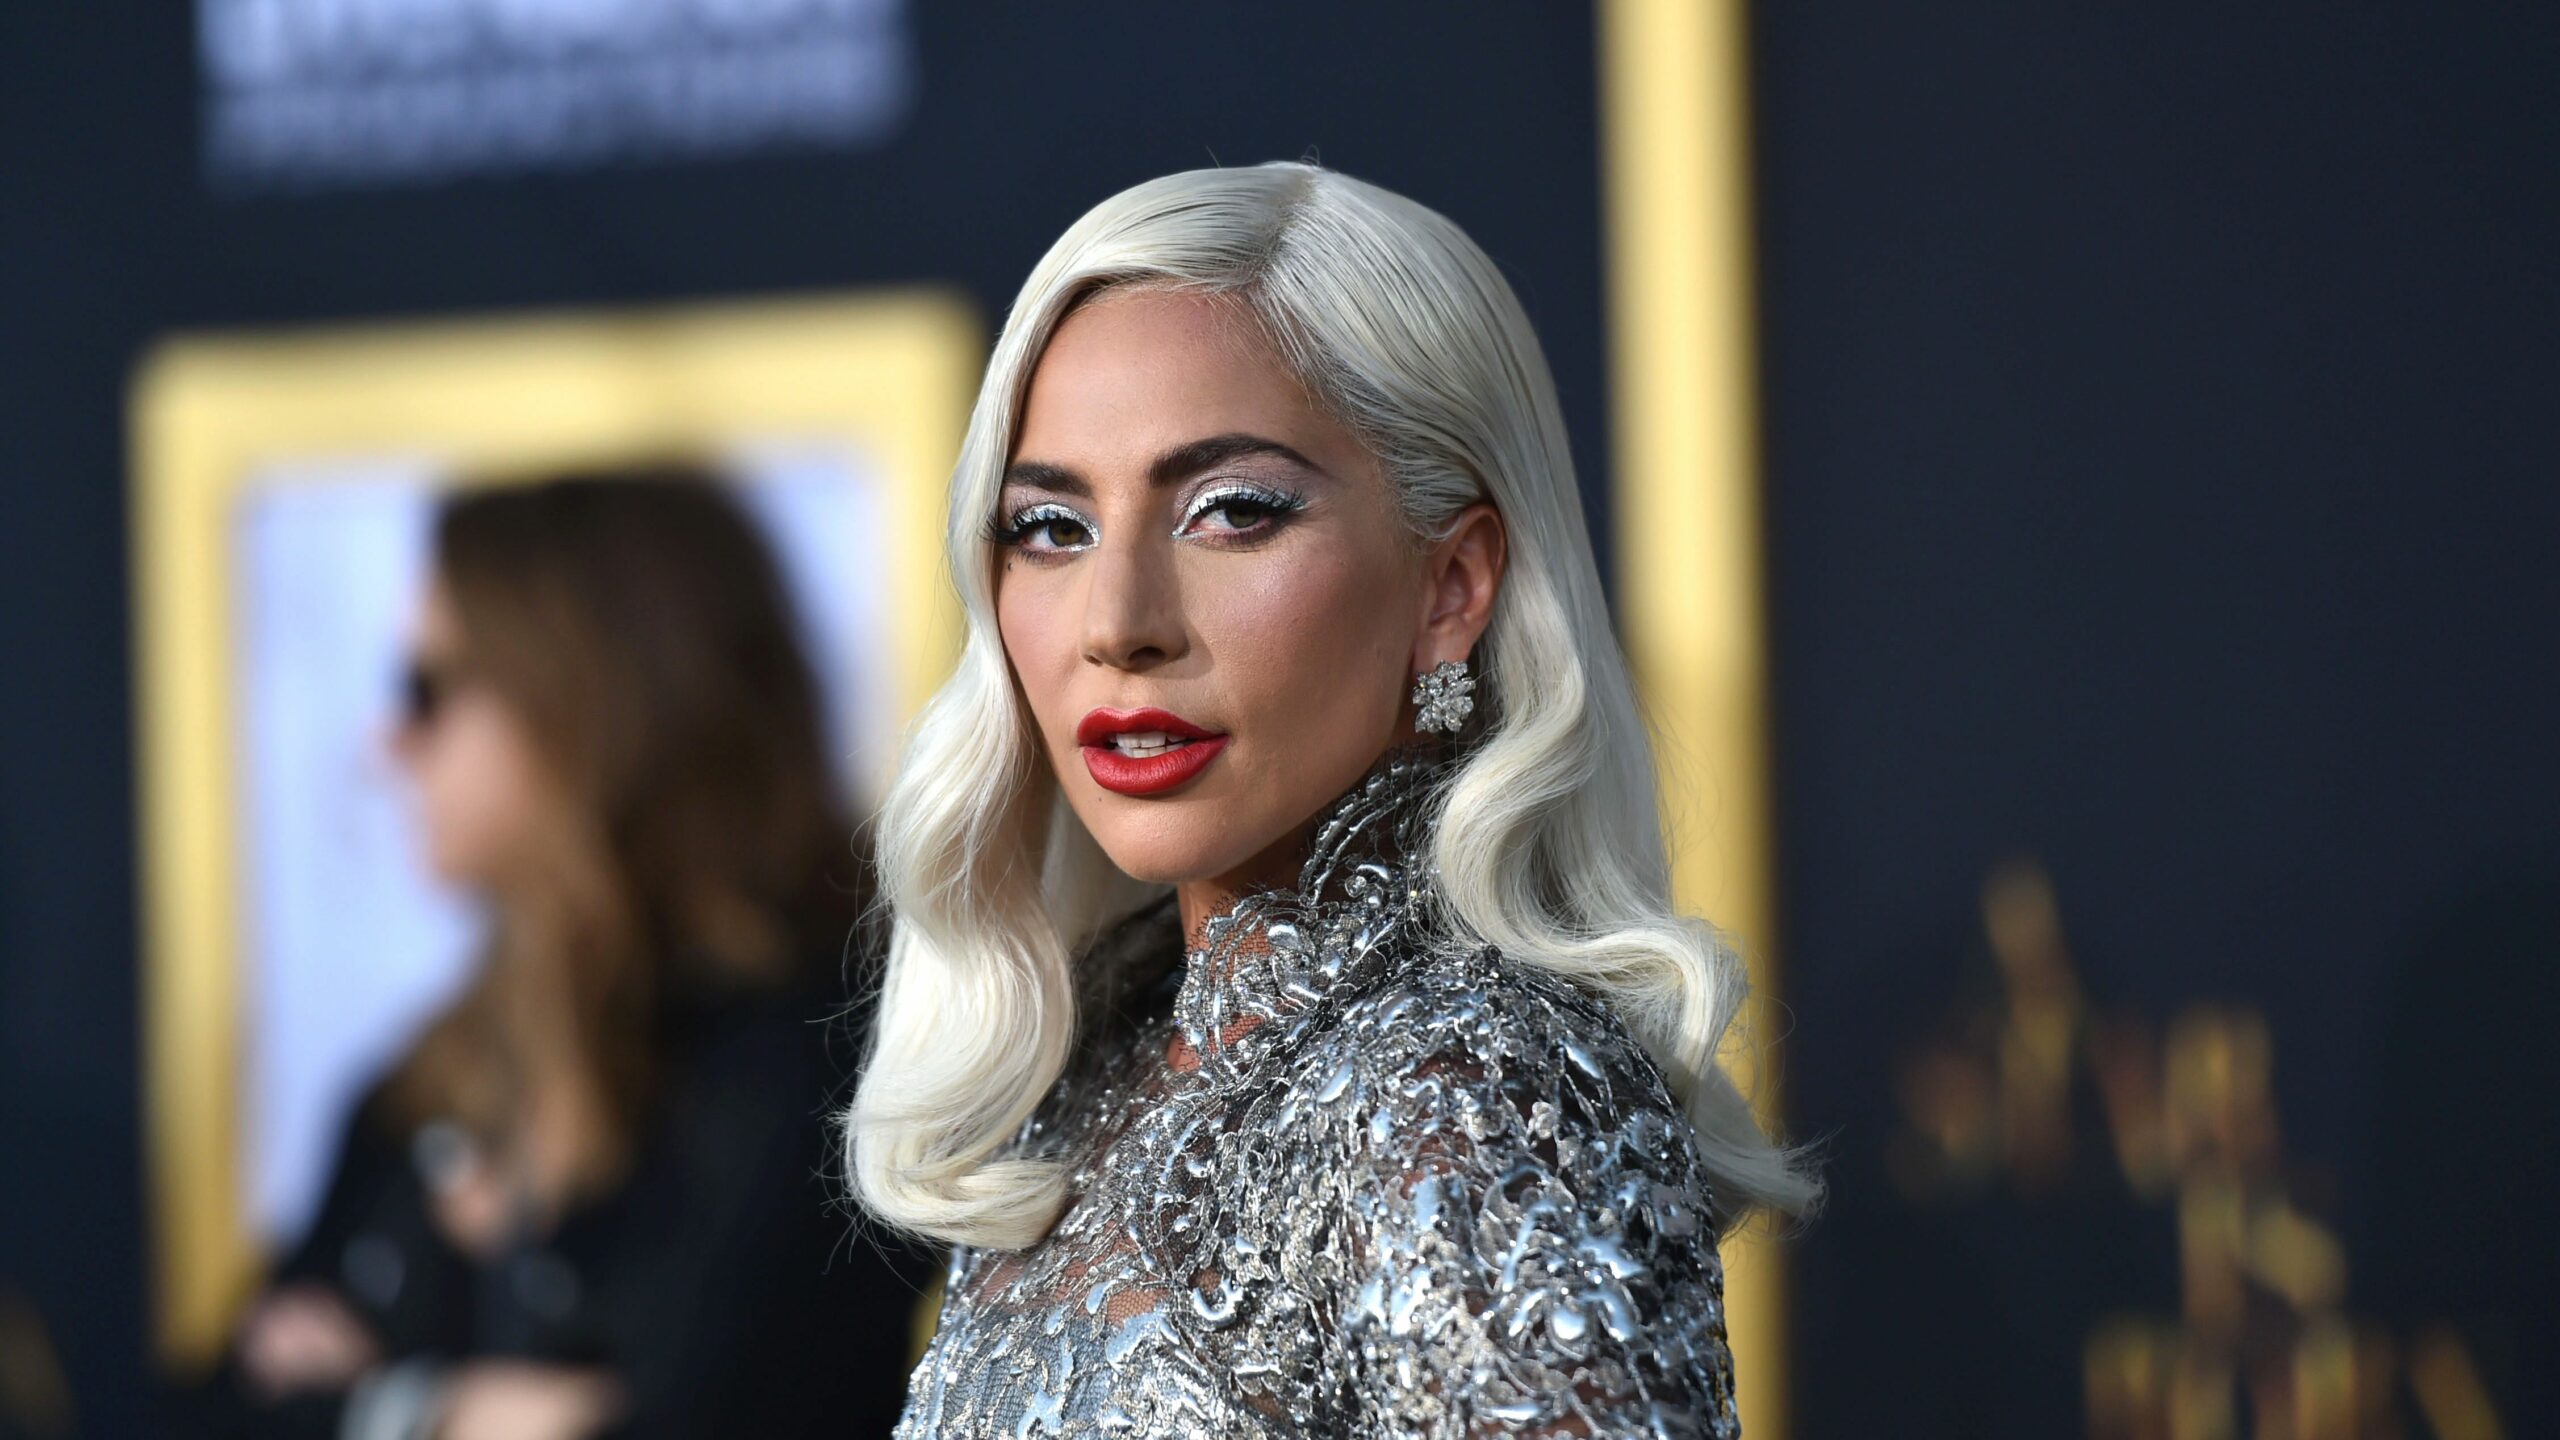 Lady Gaga Faces Backlash for Appearing in Pfizer's Migraine Drug Ad Campaign